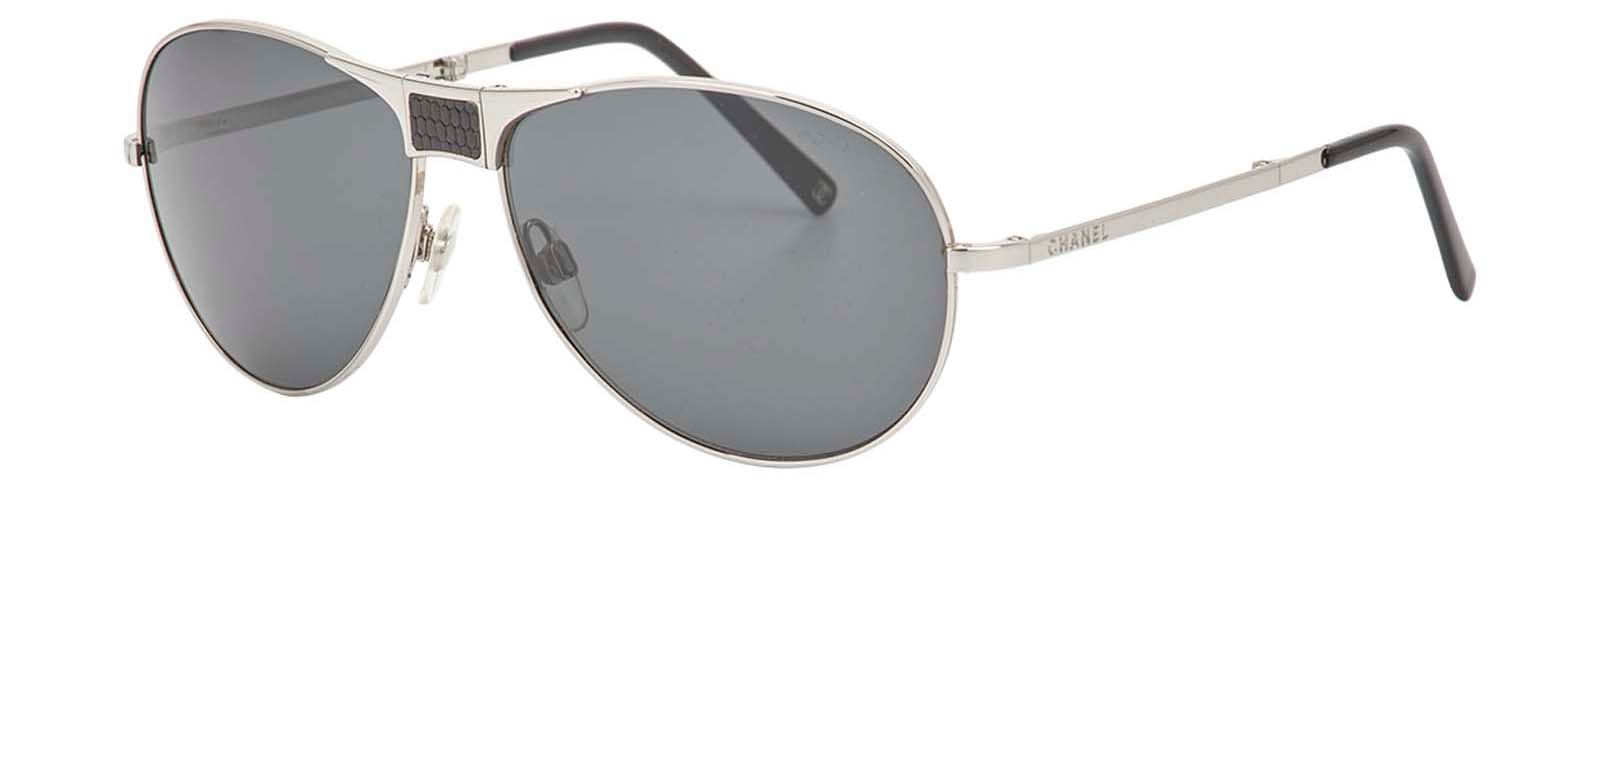 Chanel collection sunglasses - Gem